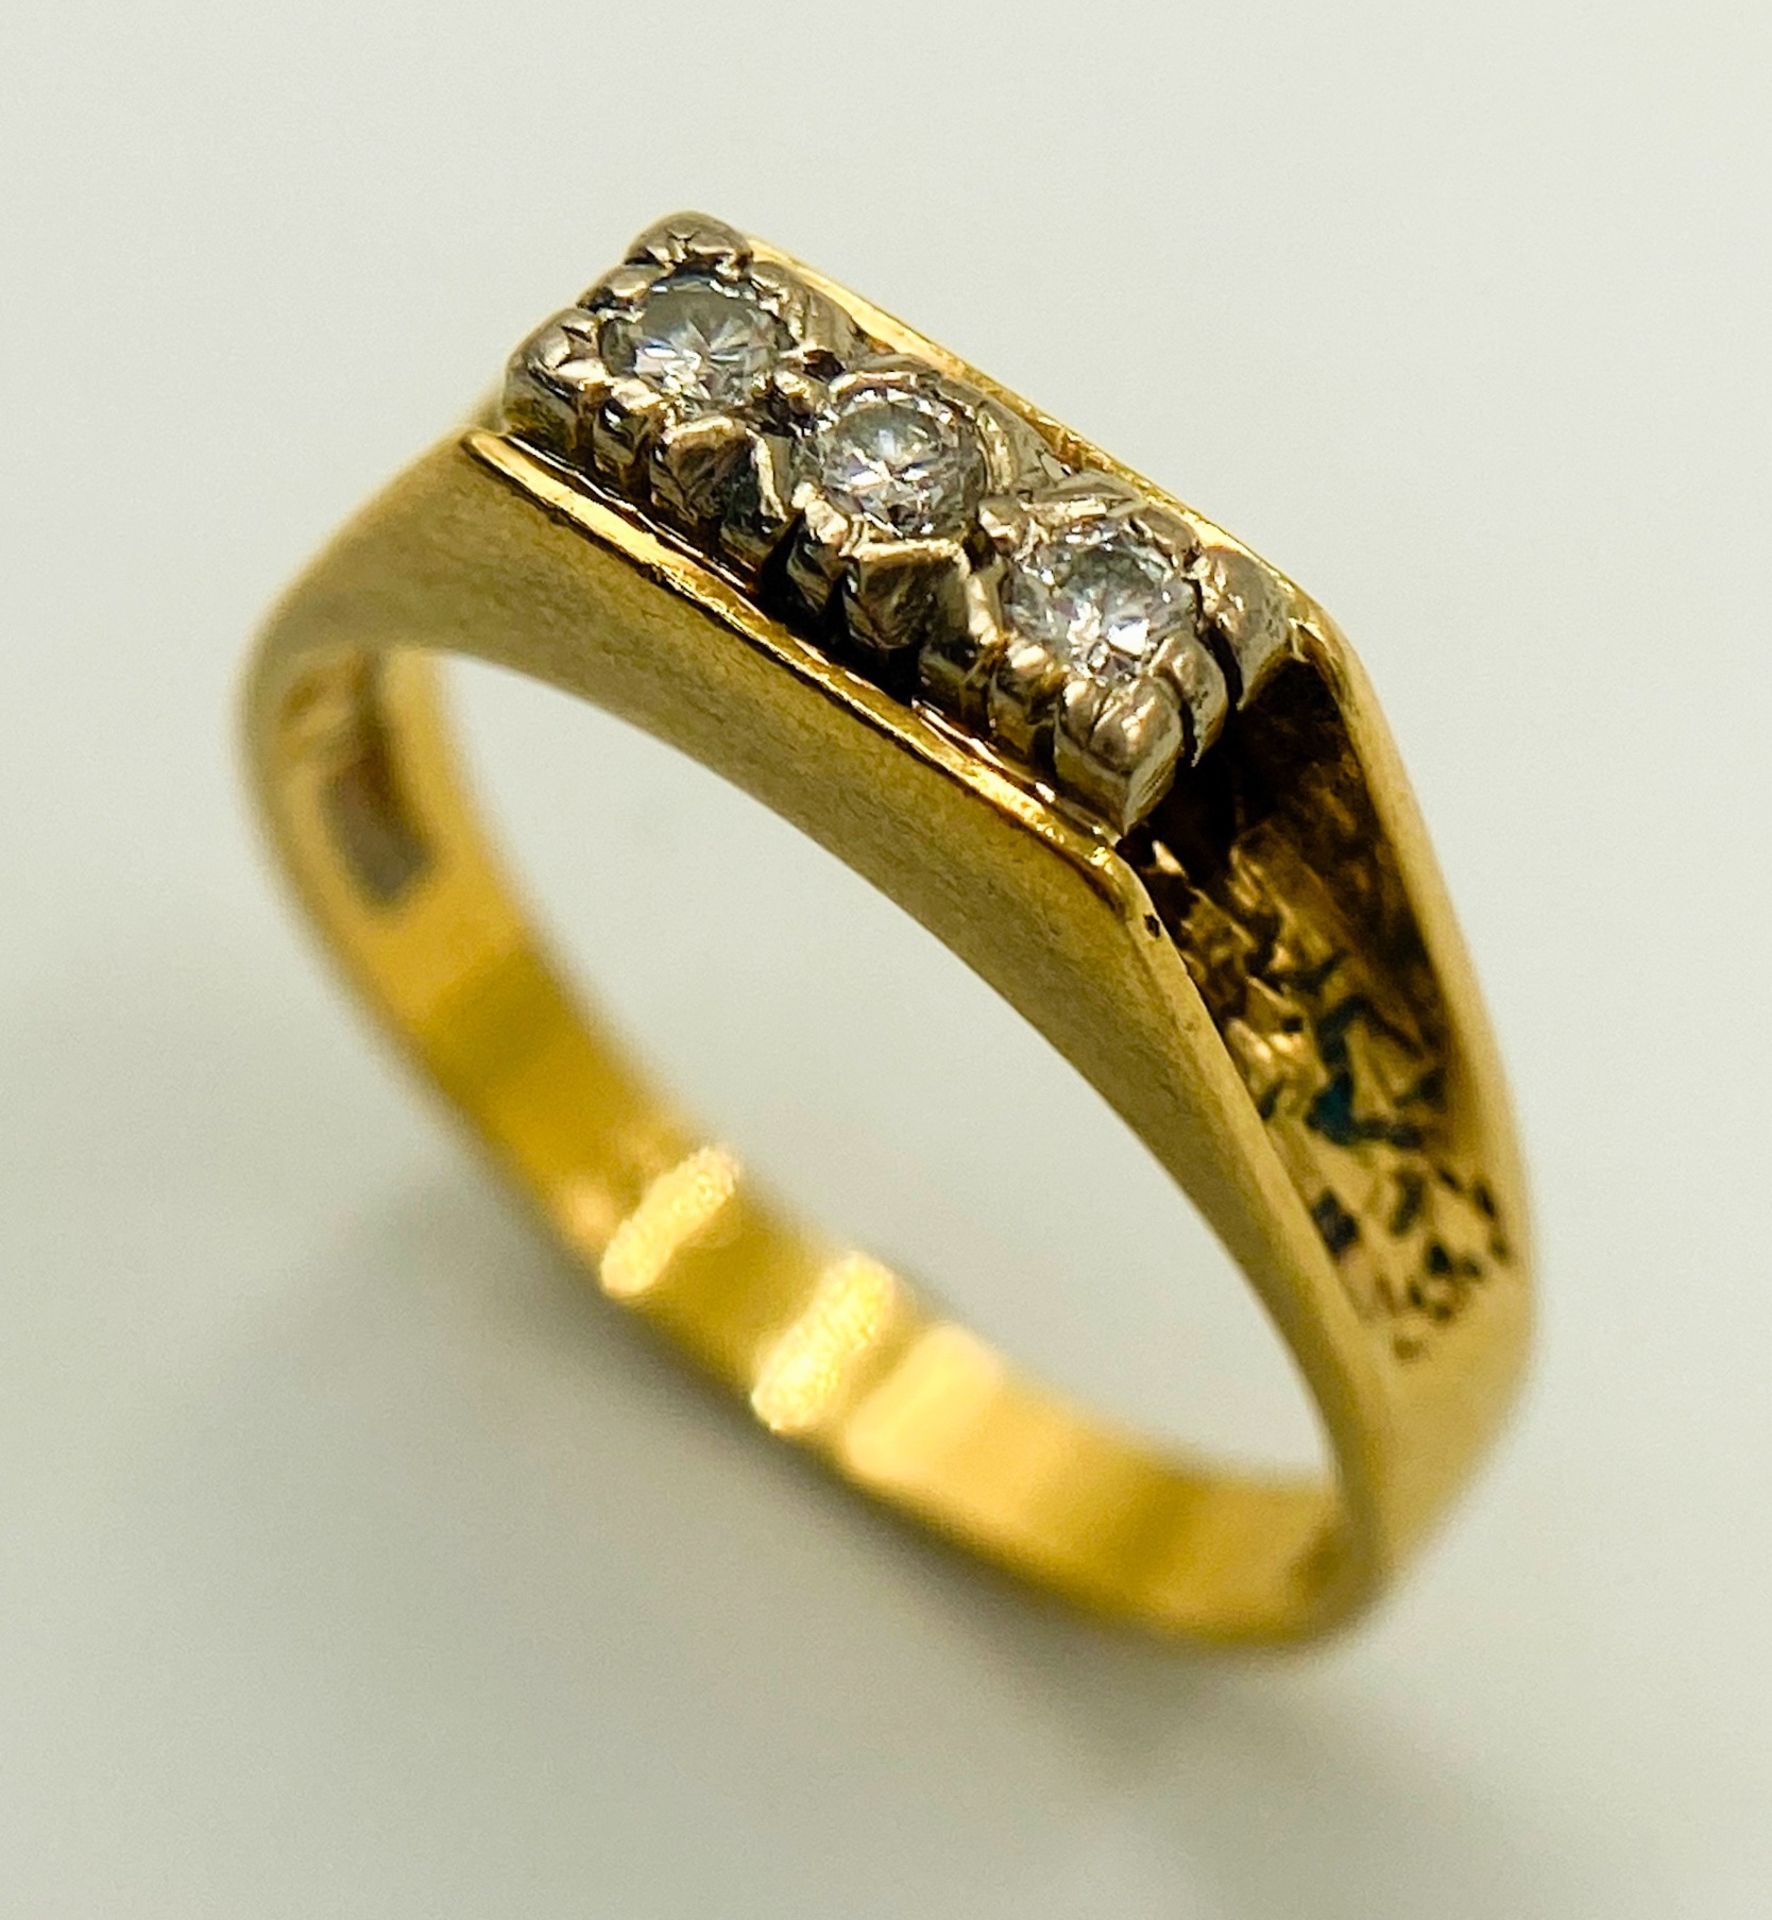 AN 18K YELLOW GOLD VINTAGE DIAMOND RING. 0.10CT. 3.5G. SIZE M. - Image 2 of 5